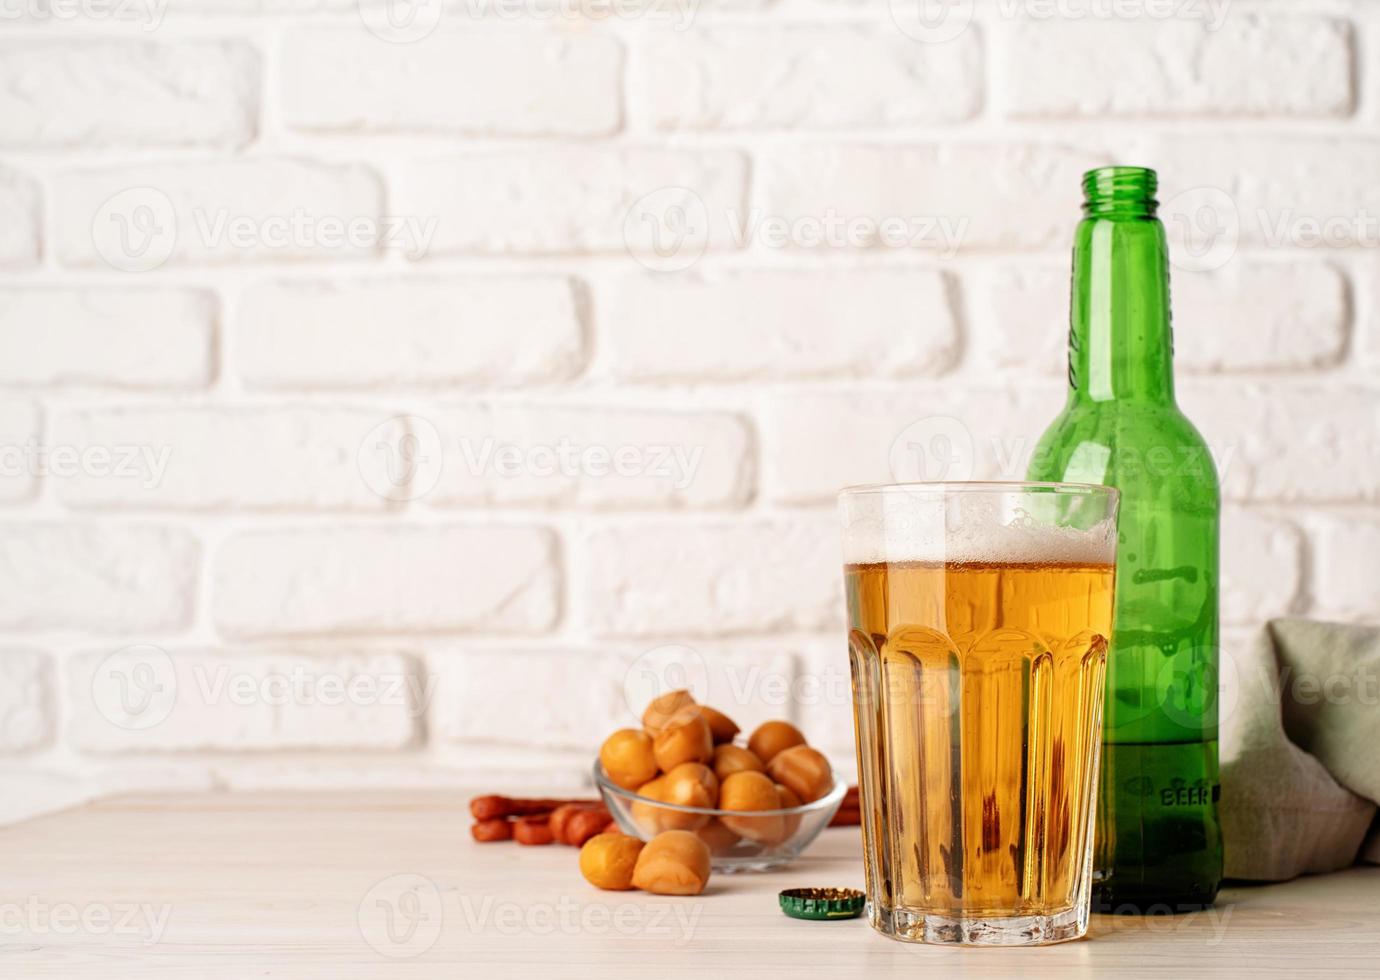 Full glass of beer, bottle and snacks, white brick wall background photo